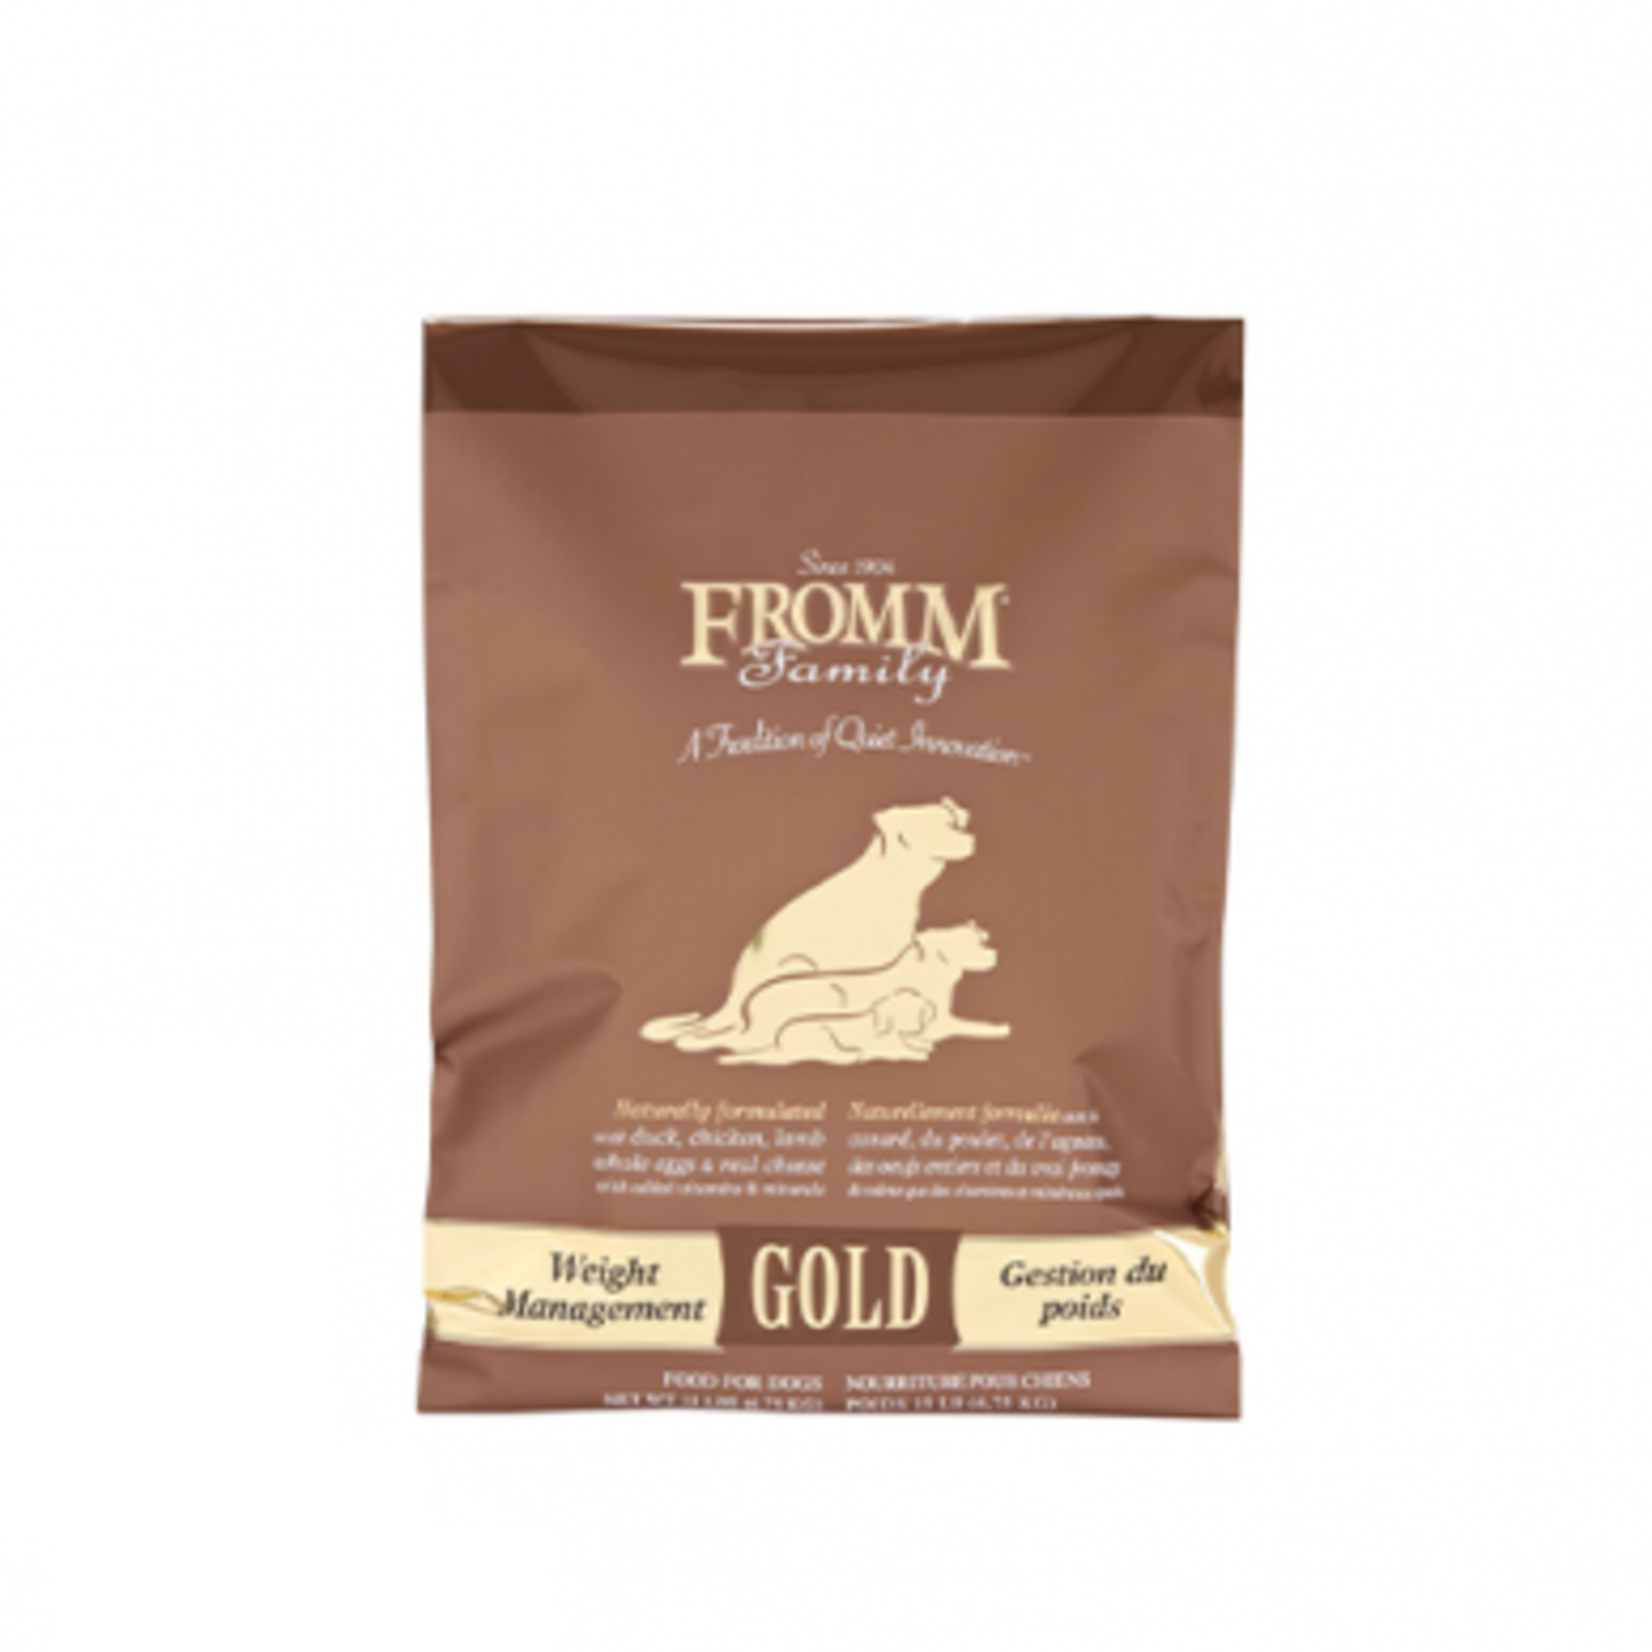 Fromm Gold - Weight Mamagement - 15 lbs